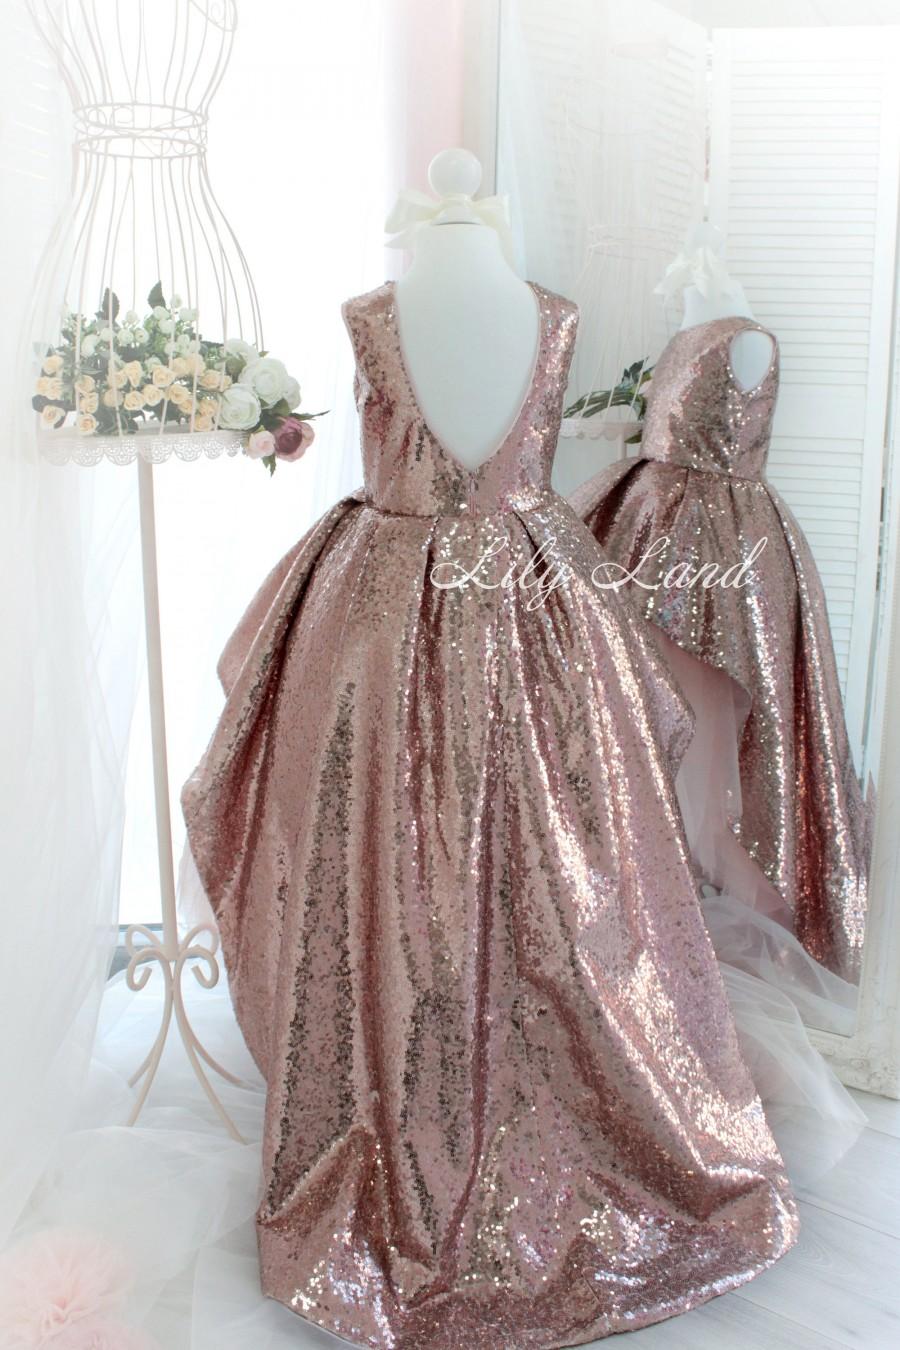 Wedding - Rose Gold sequin Girl dress with train tutu dress girls dress for baby dress with sparkling tutu dress toddler tulle size 6 9 12 18 24 month